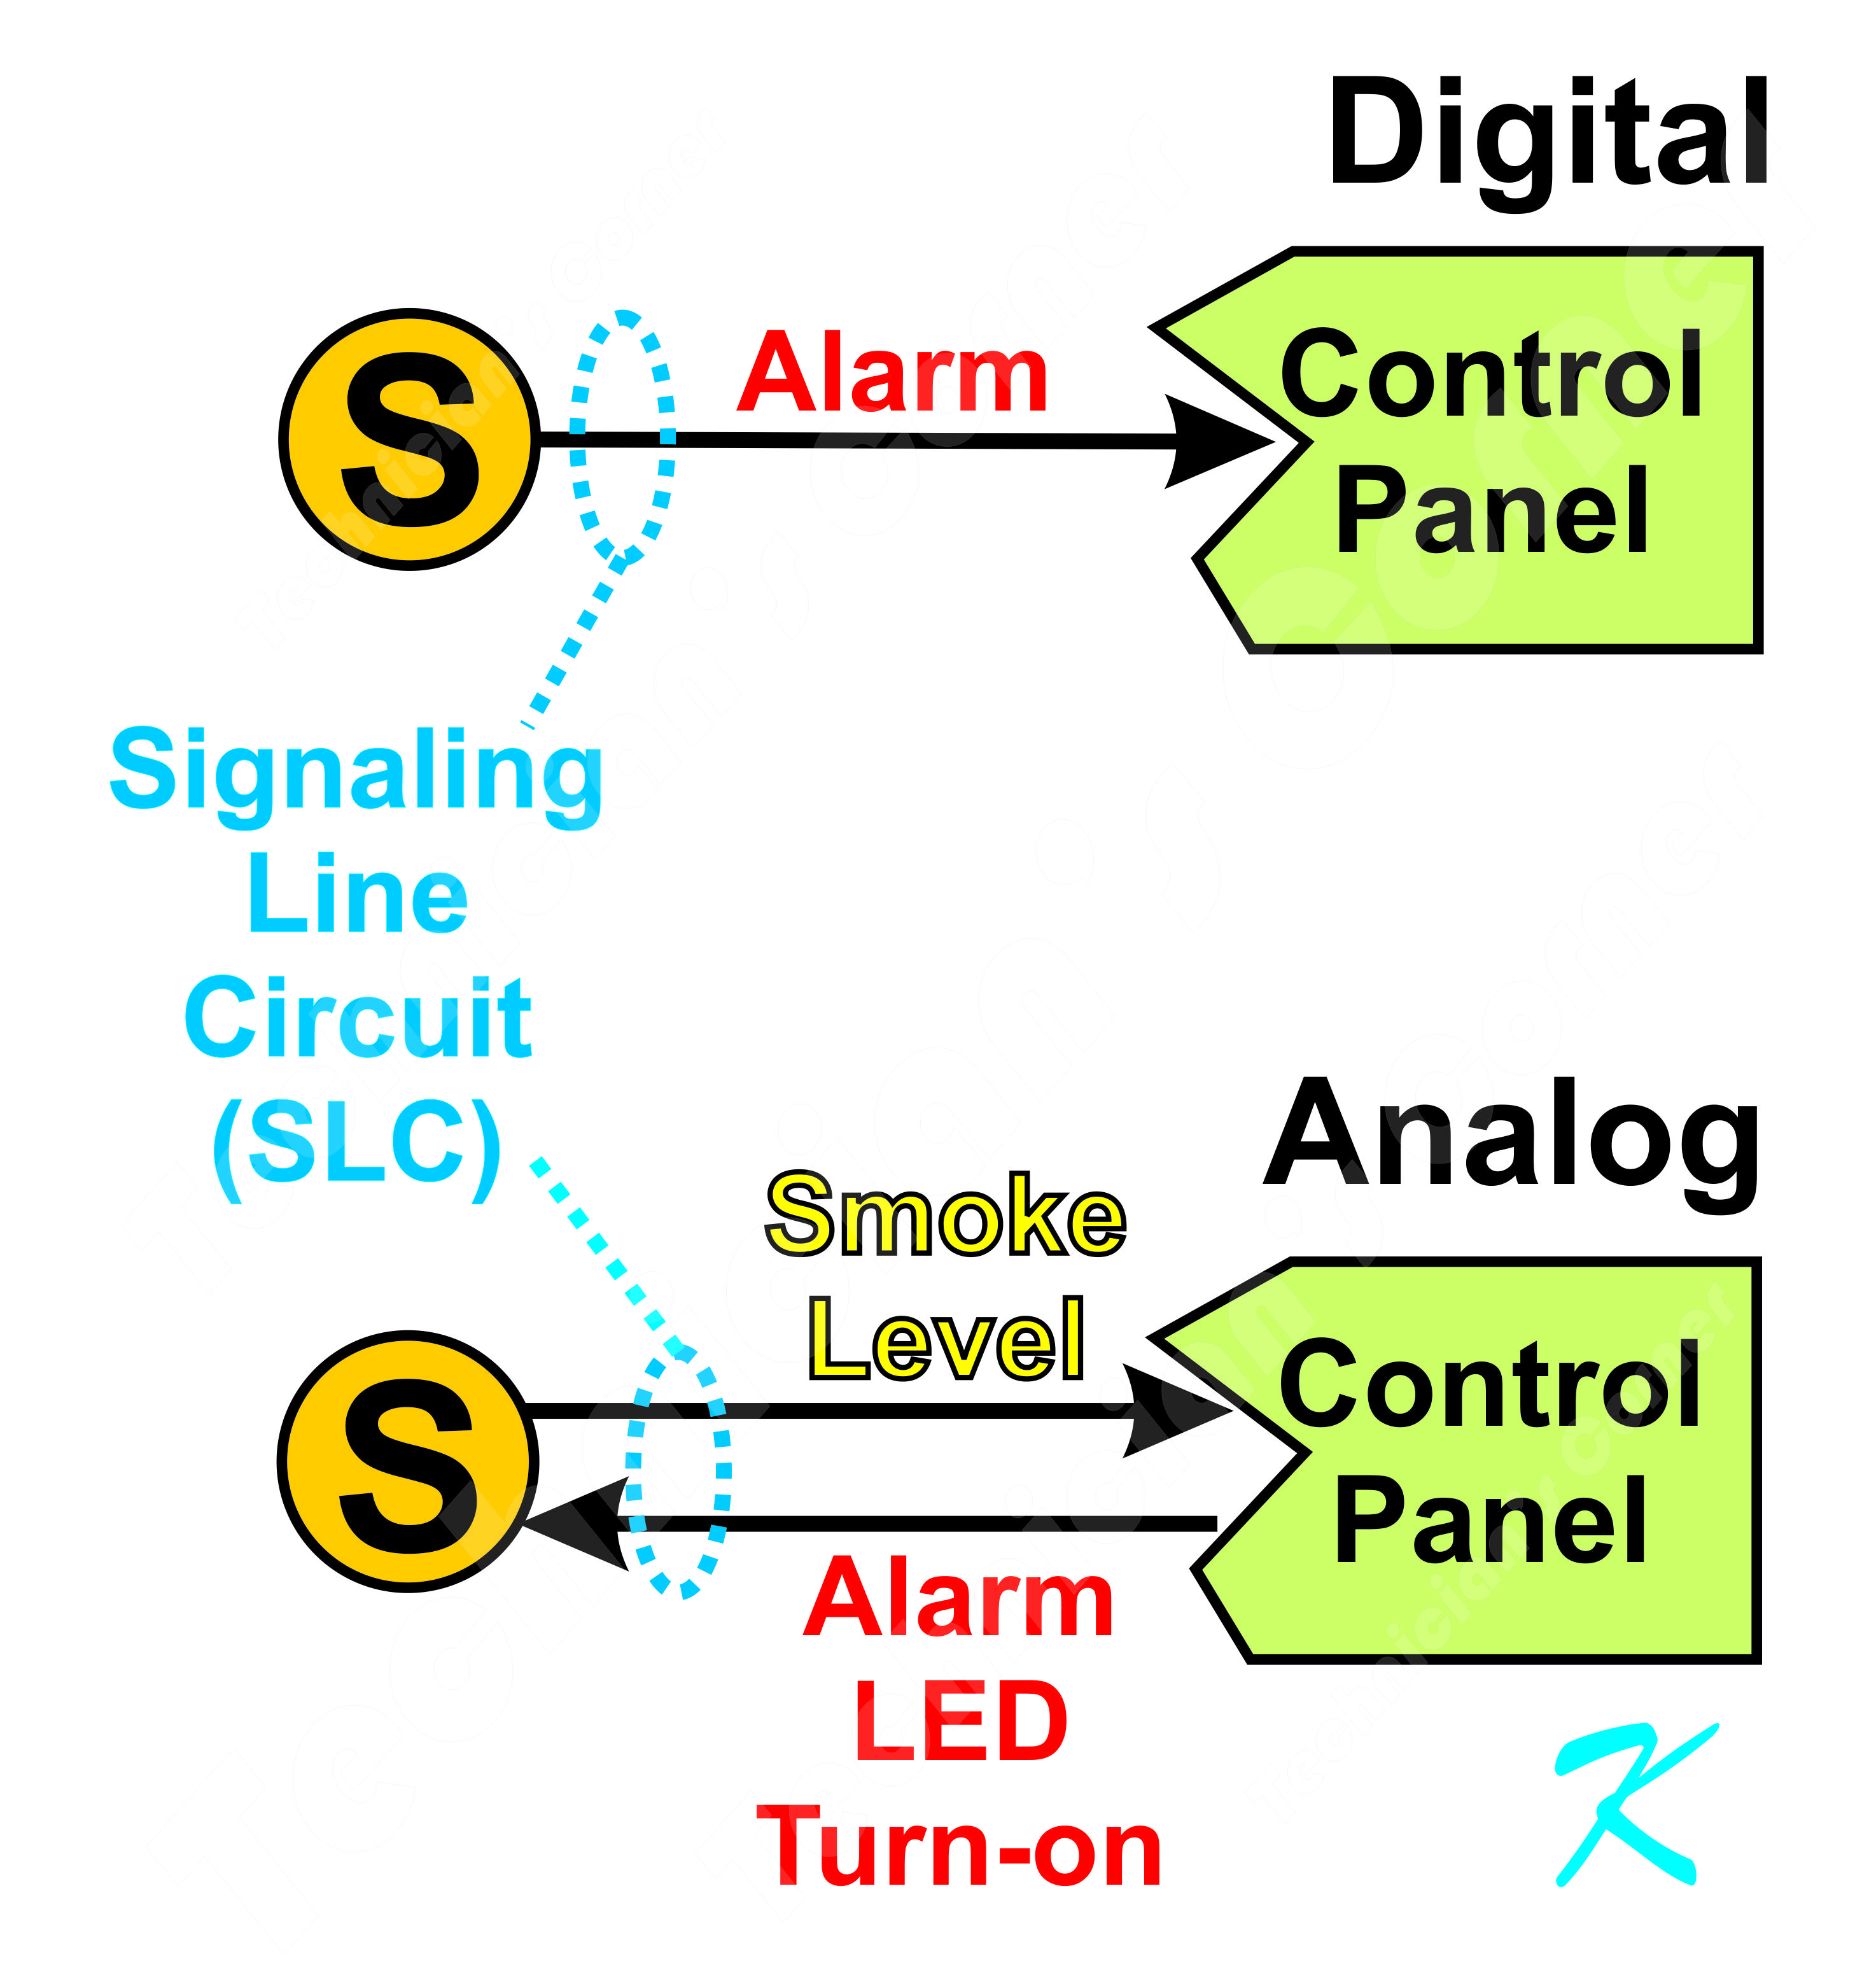 Two types of addressable fire alarm systems -- digital communications and analog communications